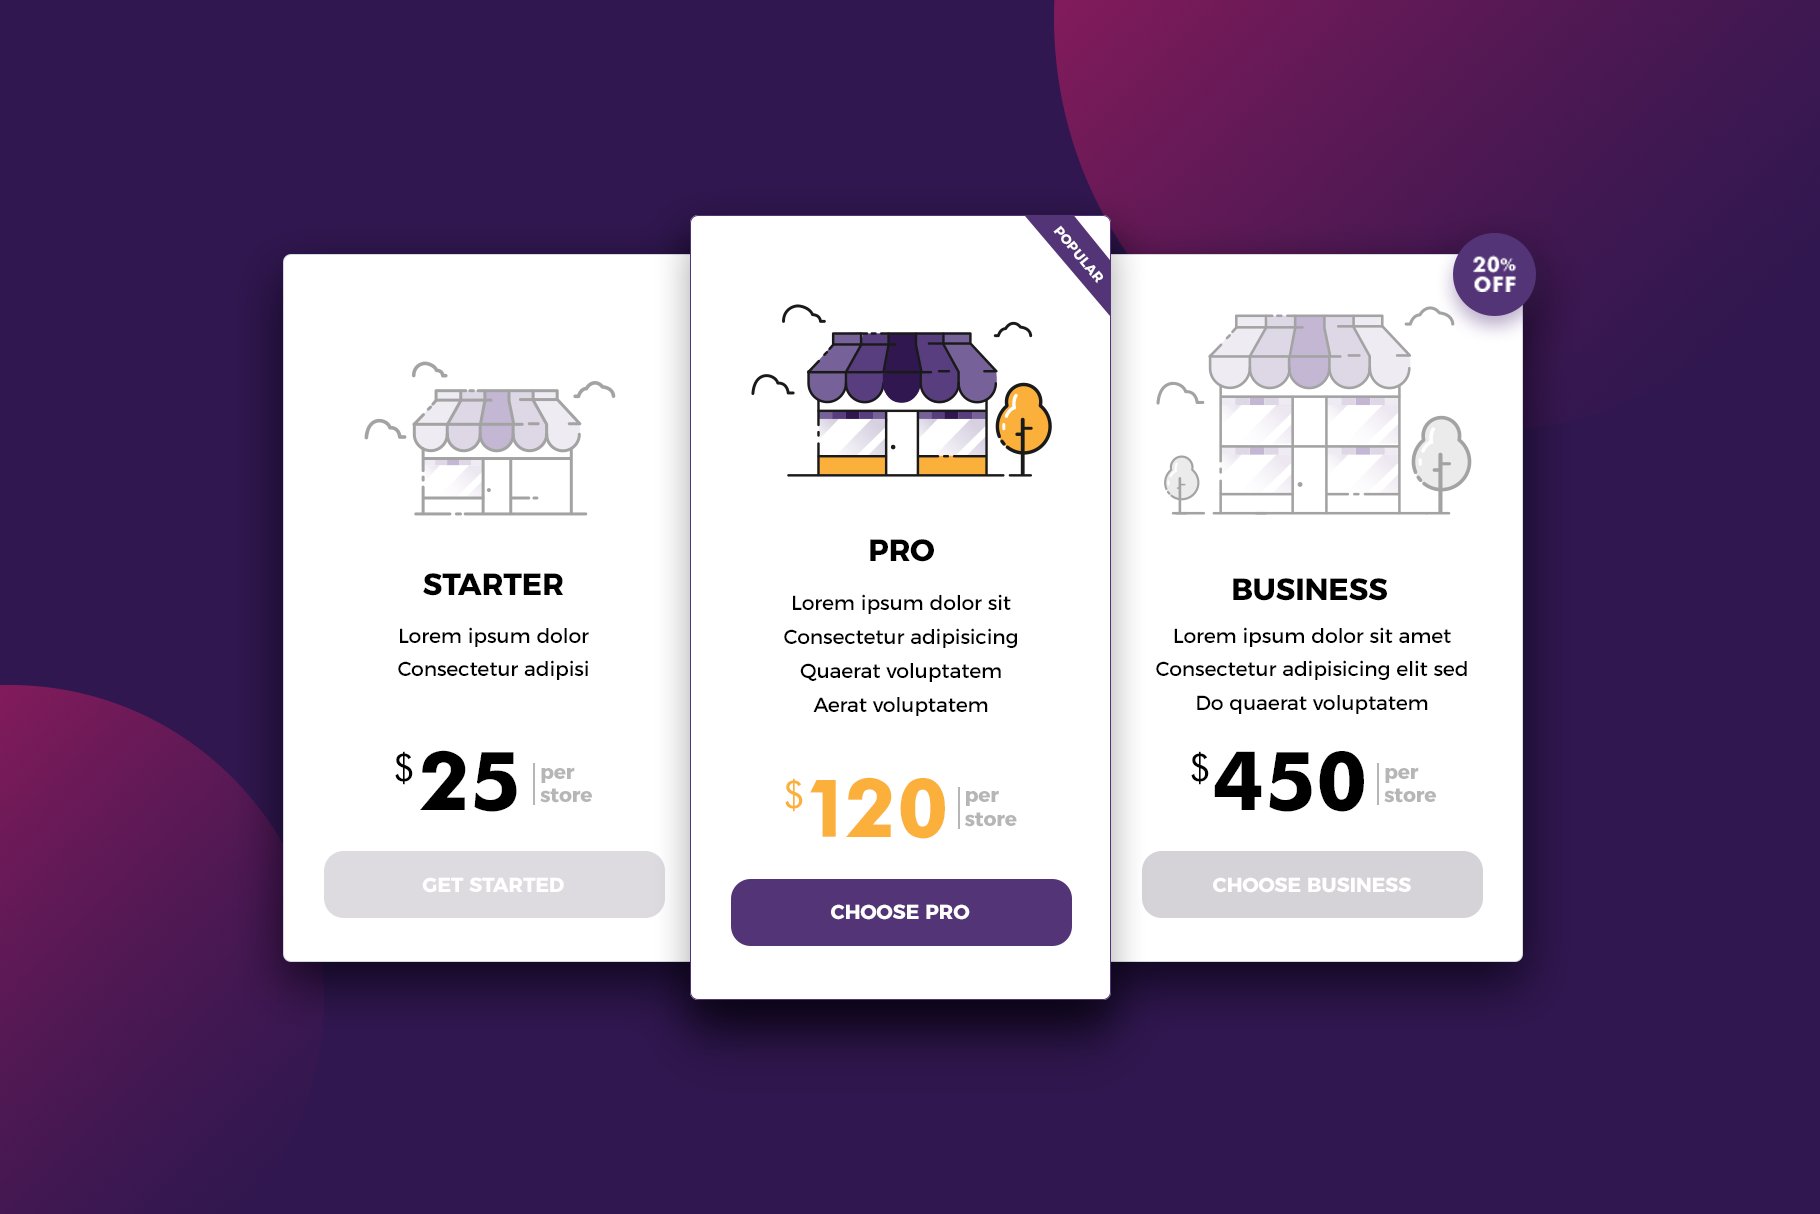 Pricing table for store cover image.